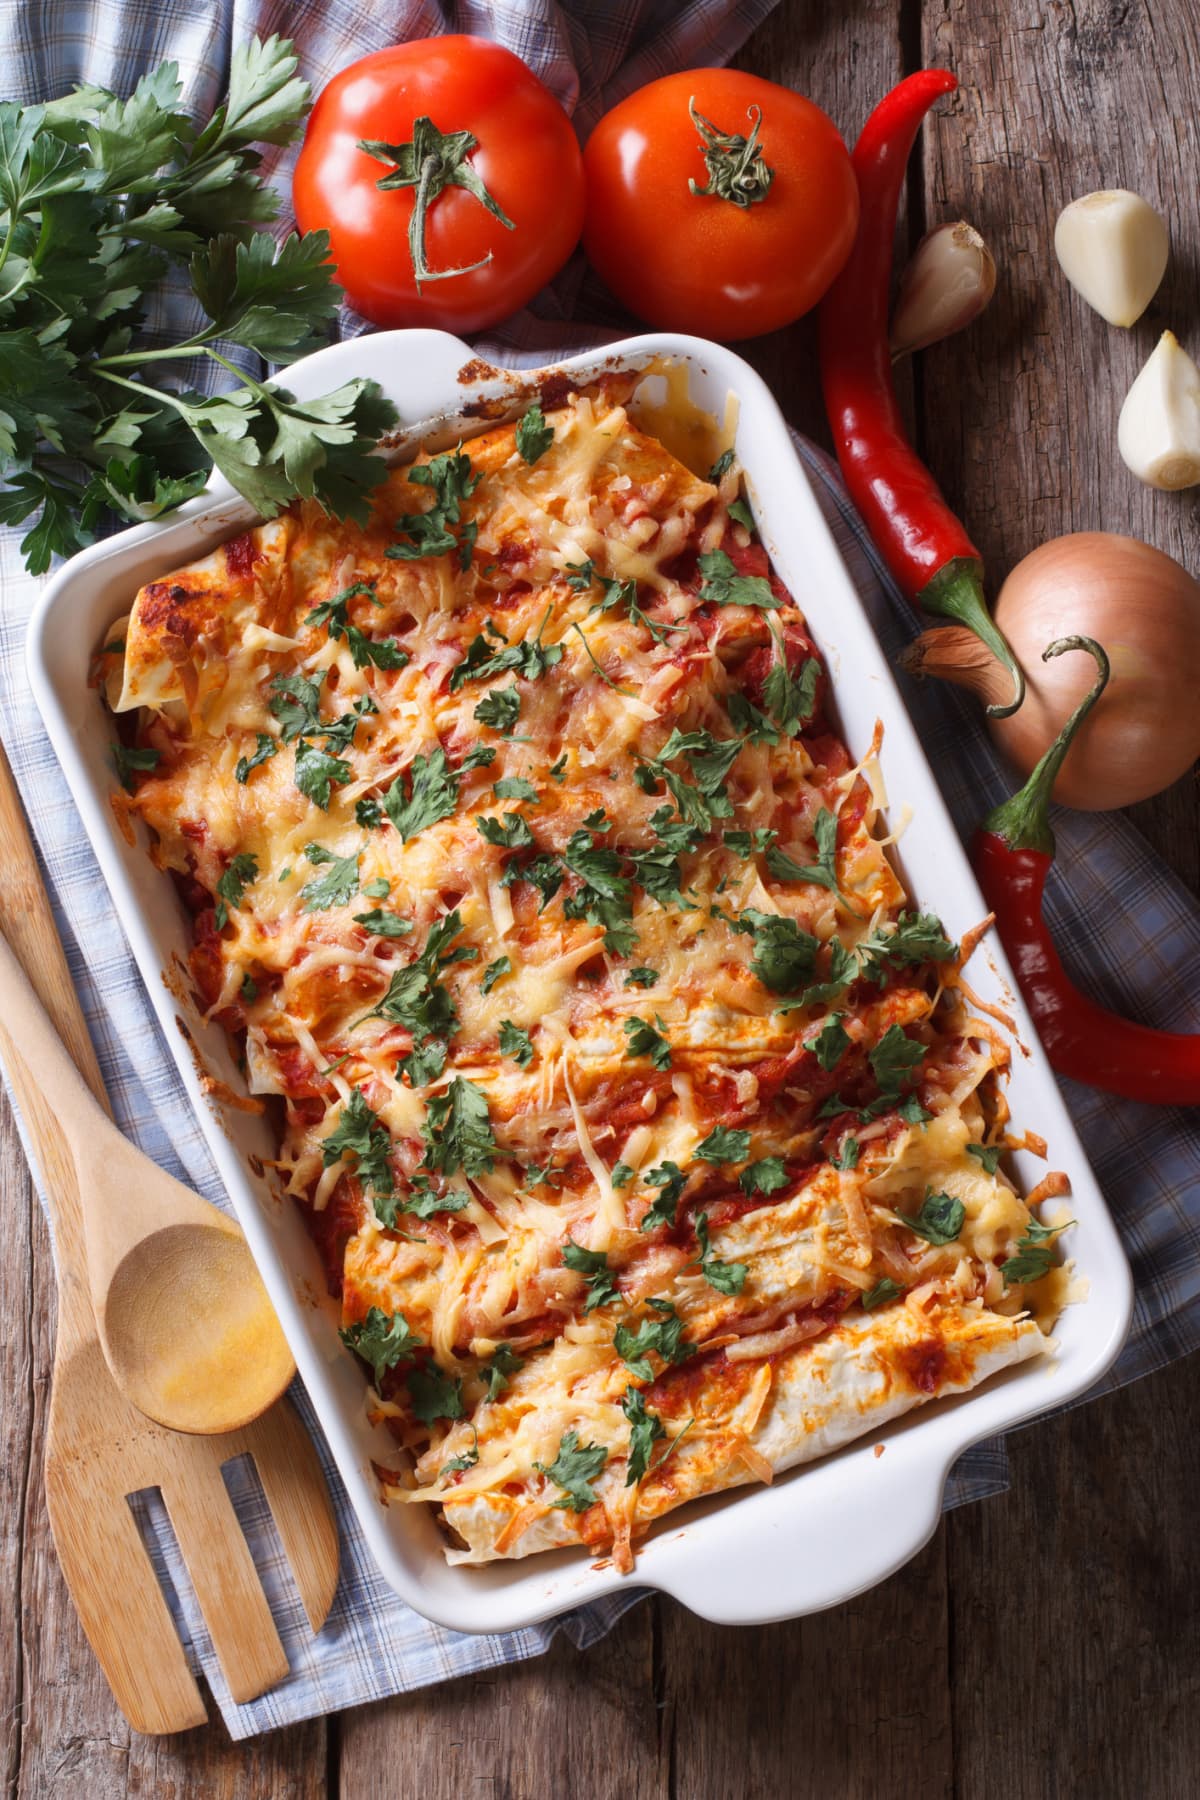 Casserole dish of enchiladas with red sauce topped with fresh herbs